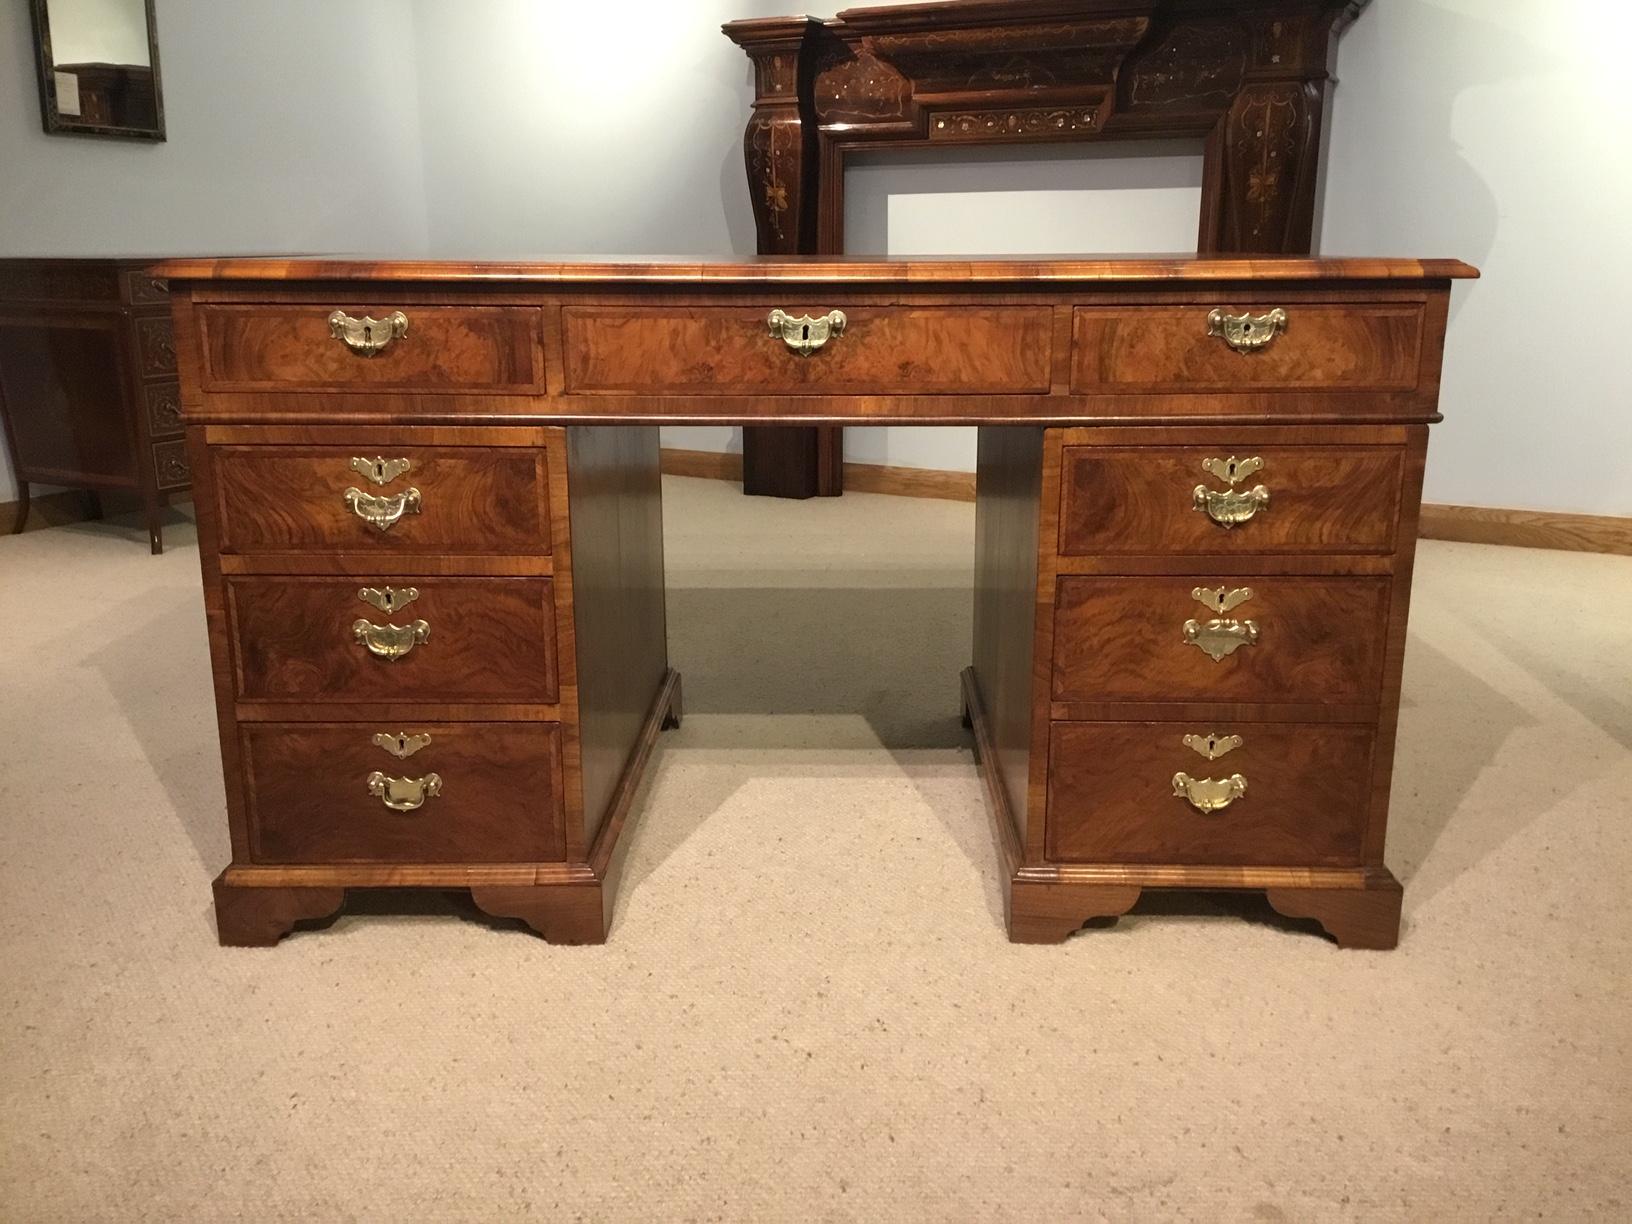 A fine quality walnut Edwardian Period partners desk in the Georgian style. Having a rectangular top having an antiqued brown leather writing surface with gilt and blind tooled detail. The top having figured walnut banding and block moulding. The